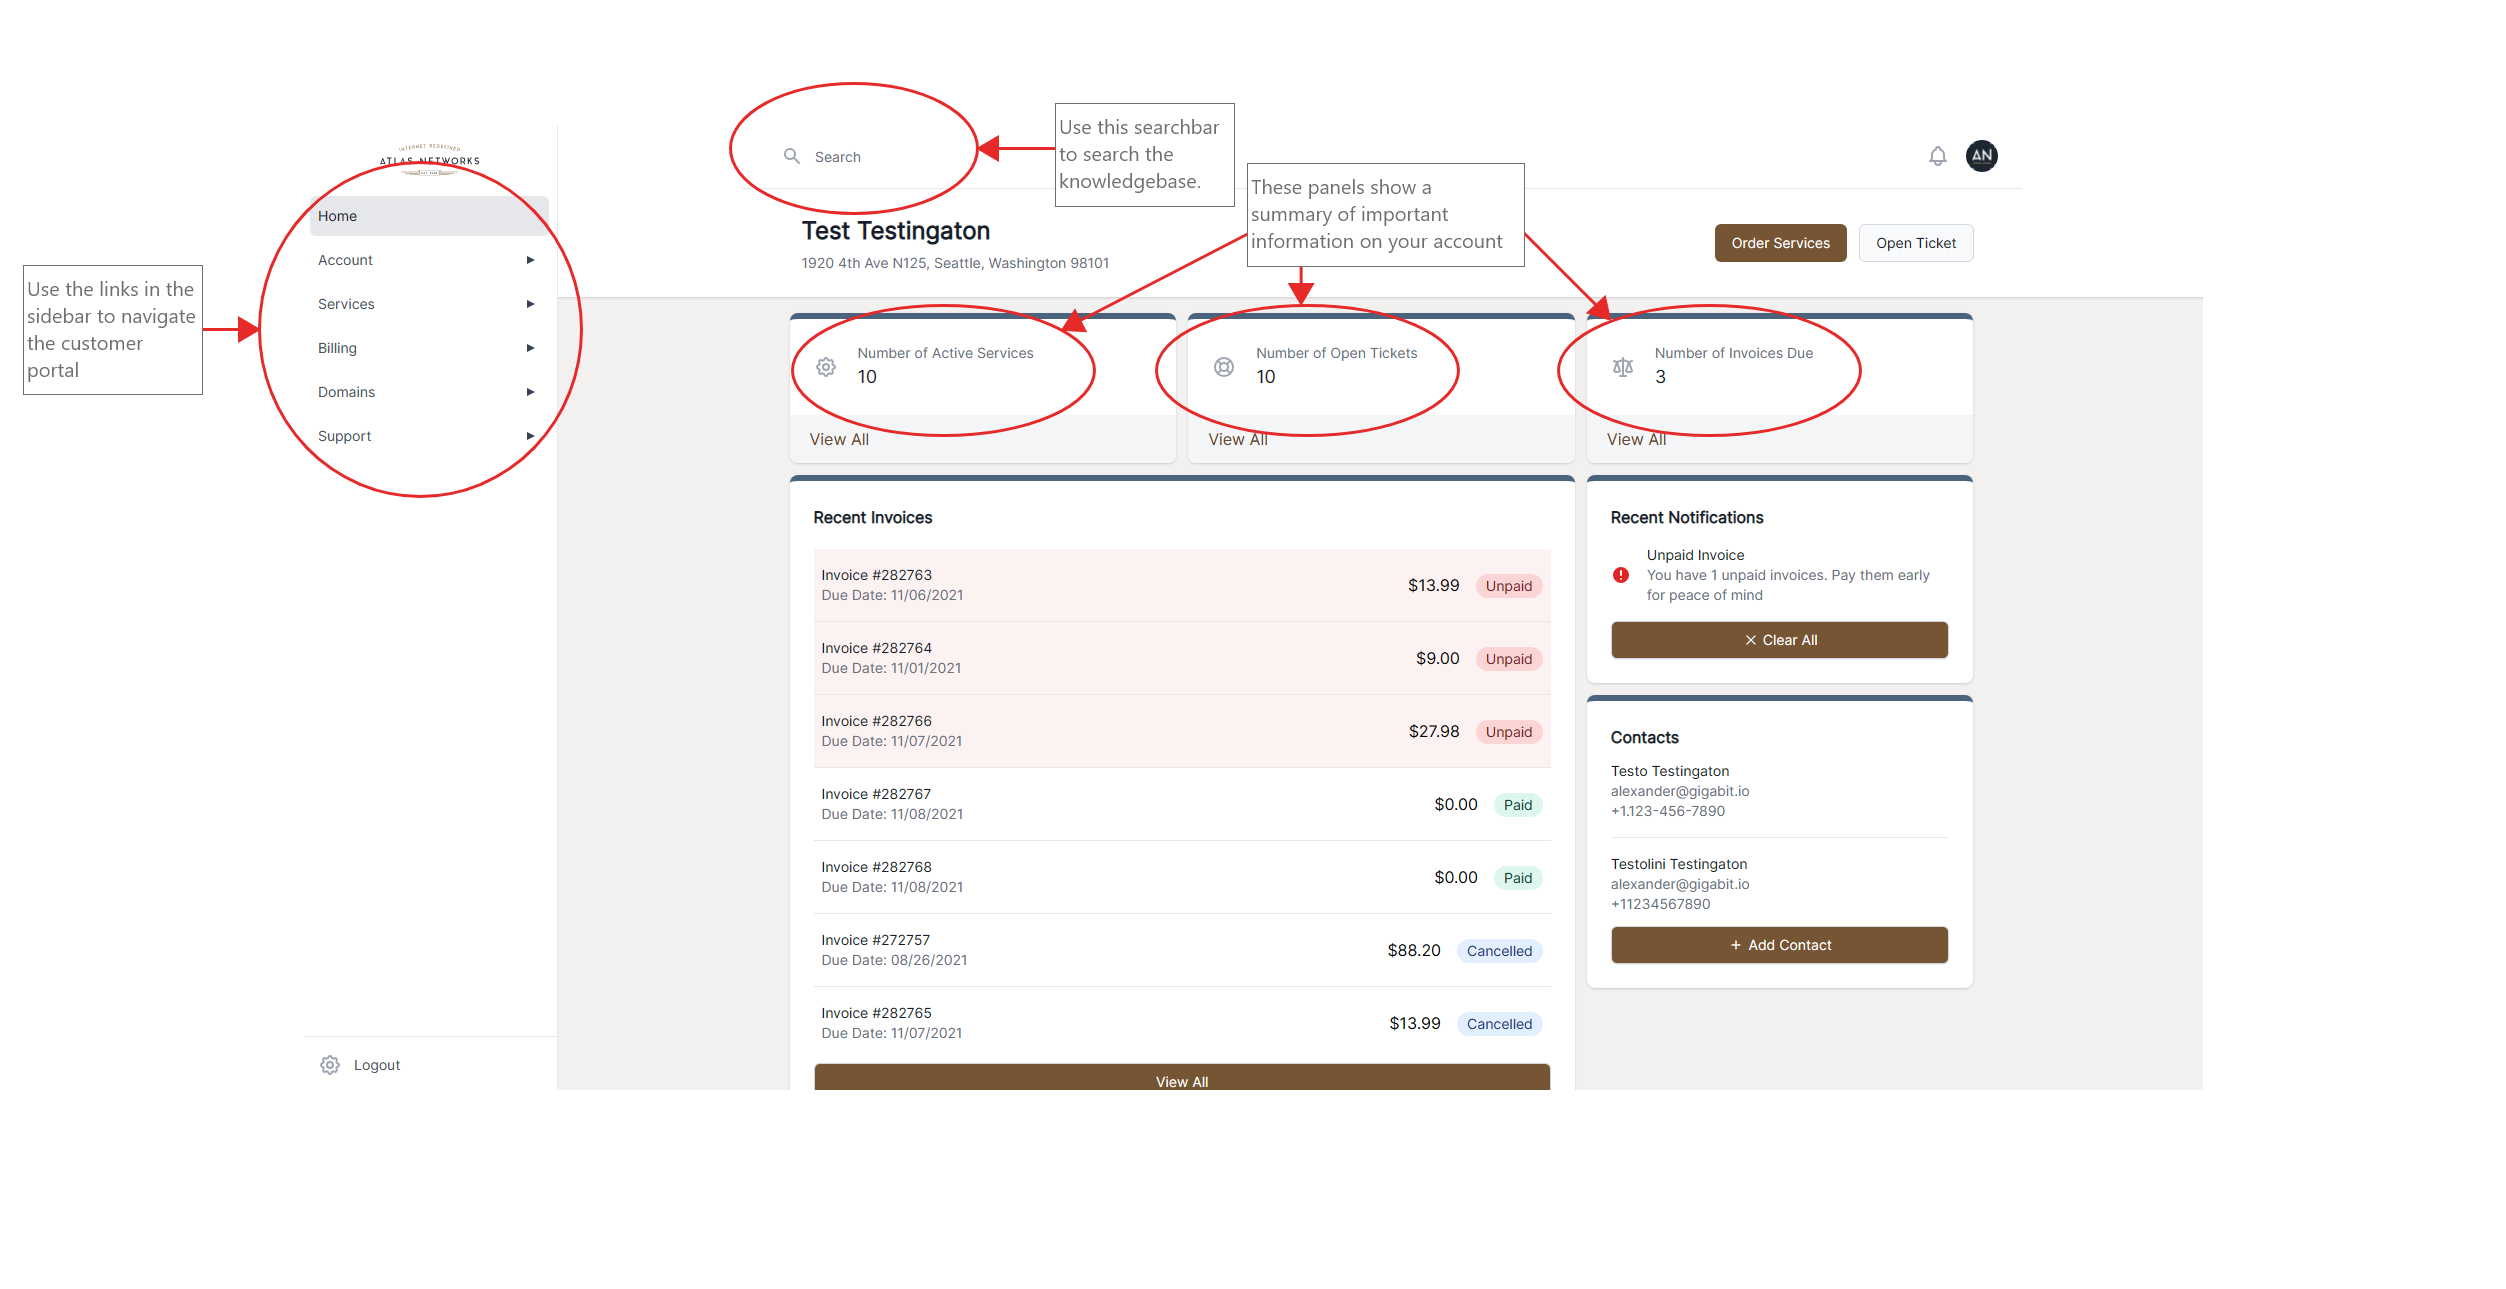 Diagram showing how to navigate the homepage of the Customer Portal